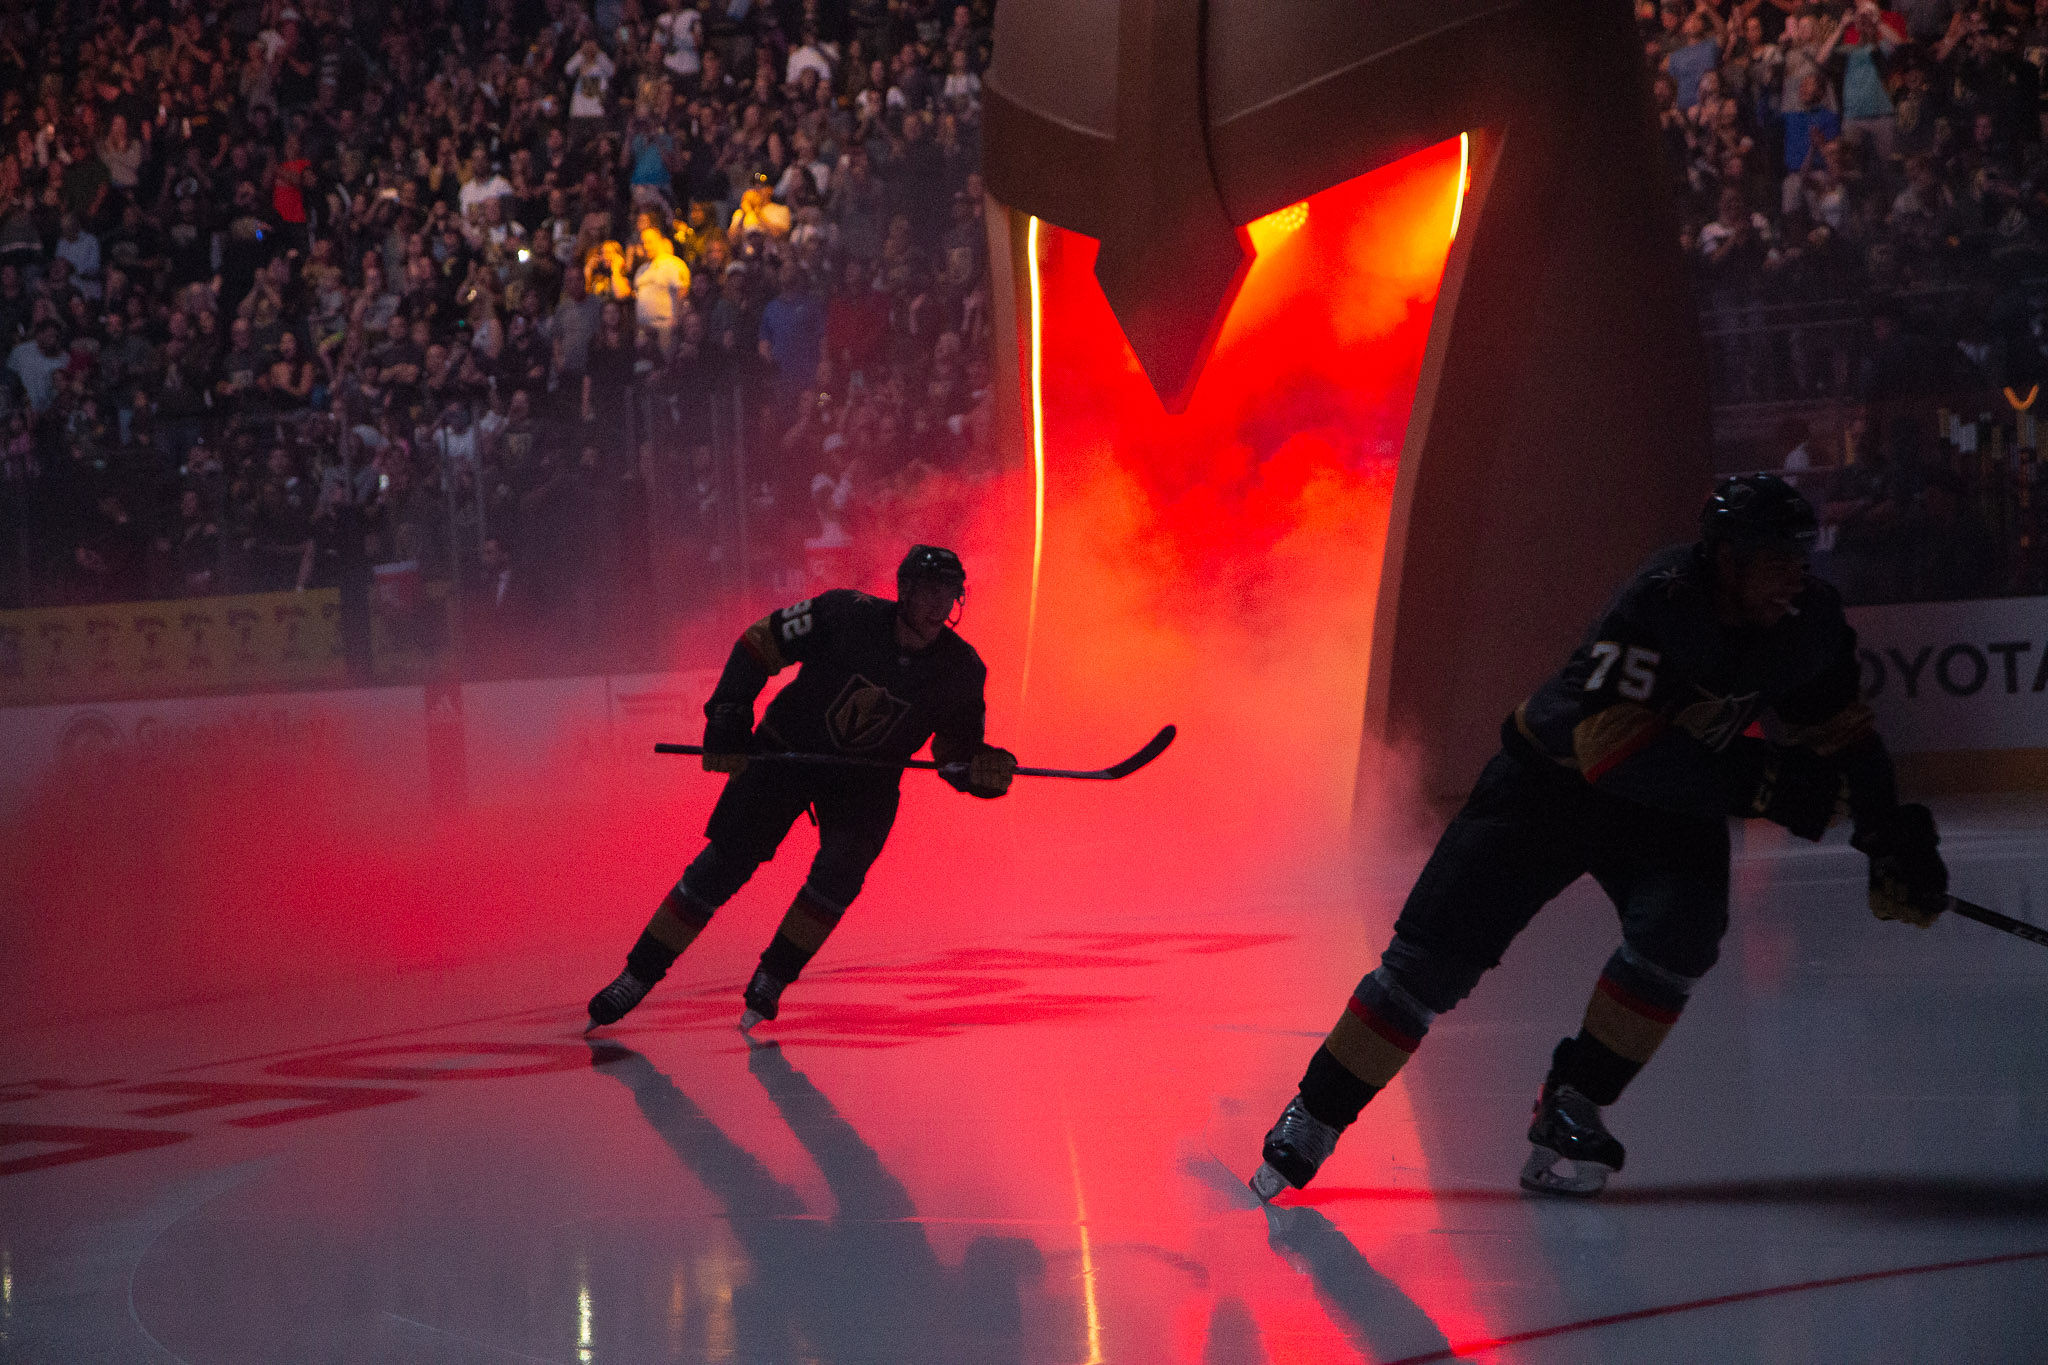 Stanley Cup Finals Bound: Golden Knights Close Deal In Dallas, Prepare For  Upstart Florida Panthers For SCF Game 1 In Las Vegas Saturday - LVSportsBiz